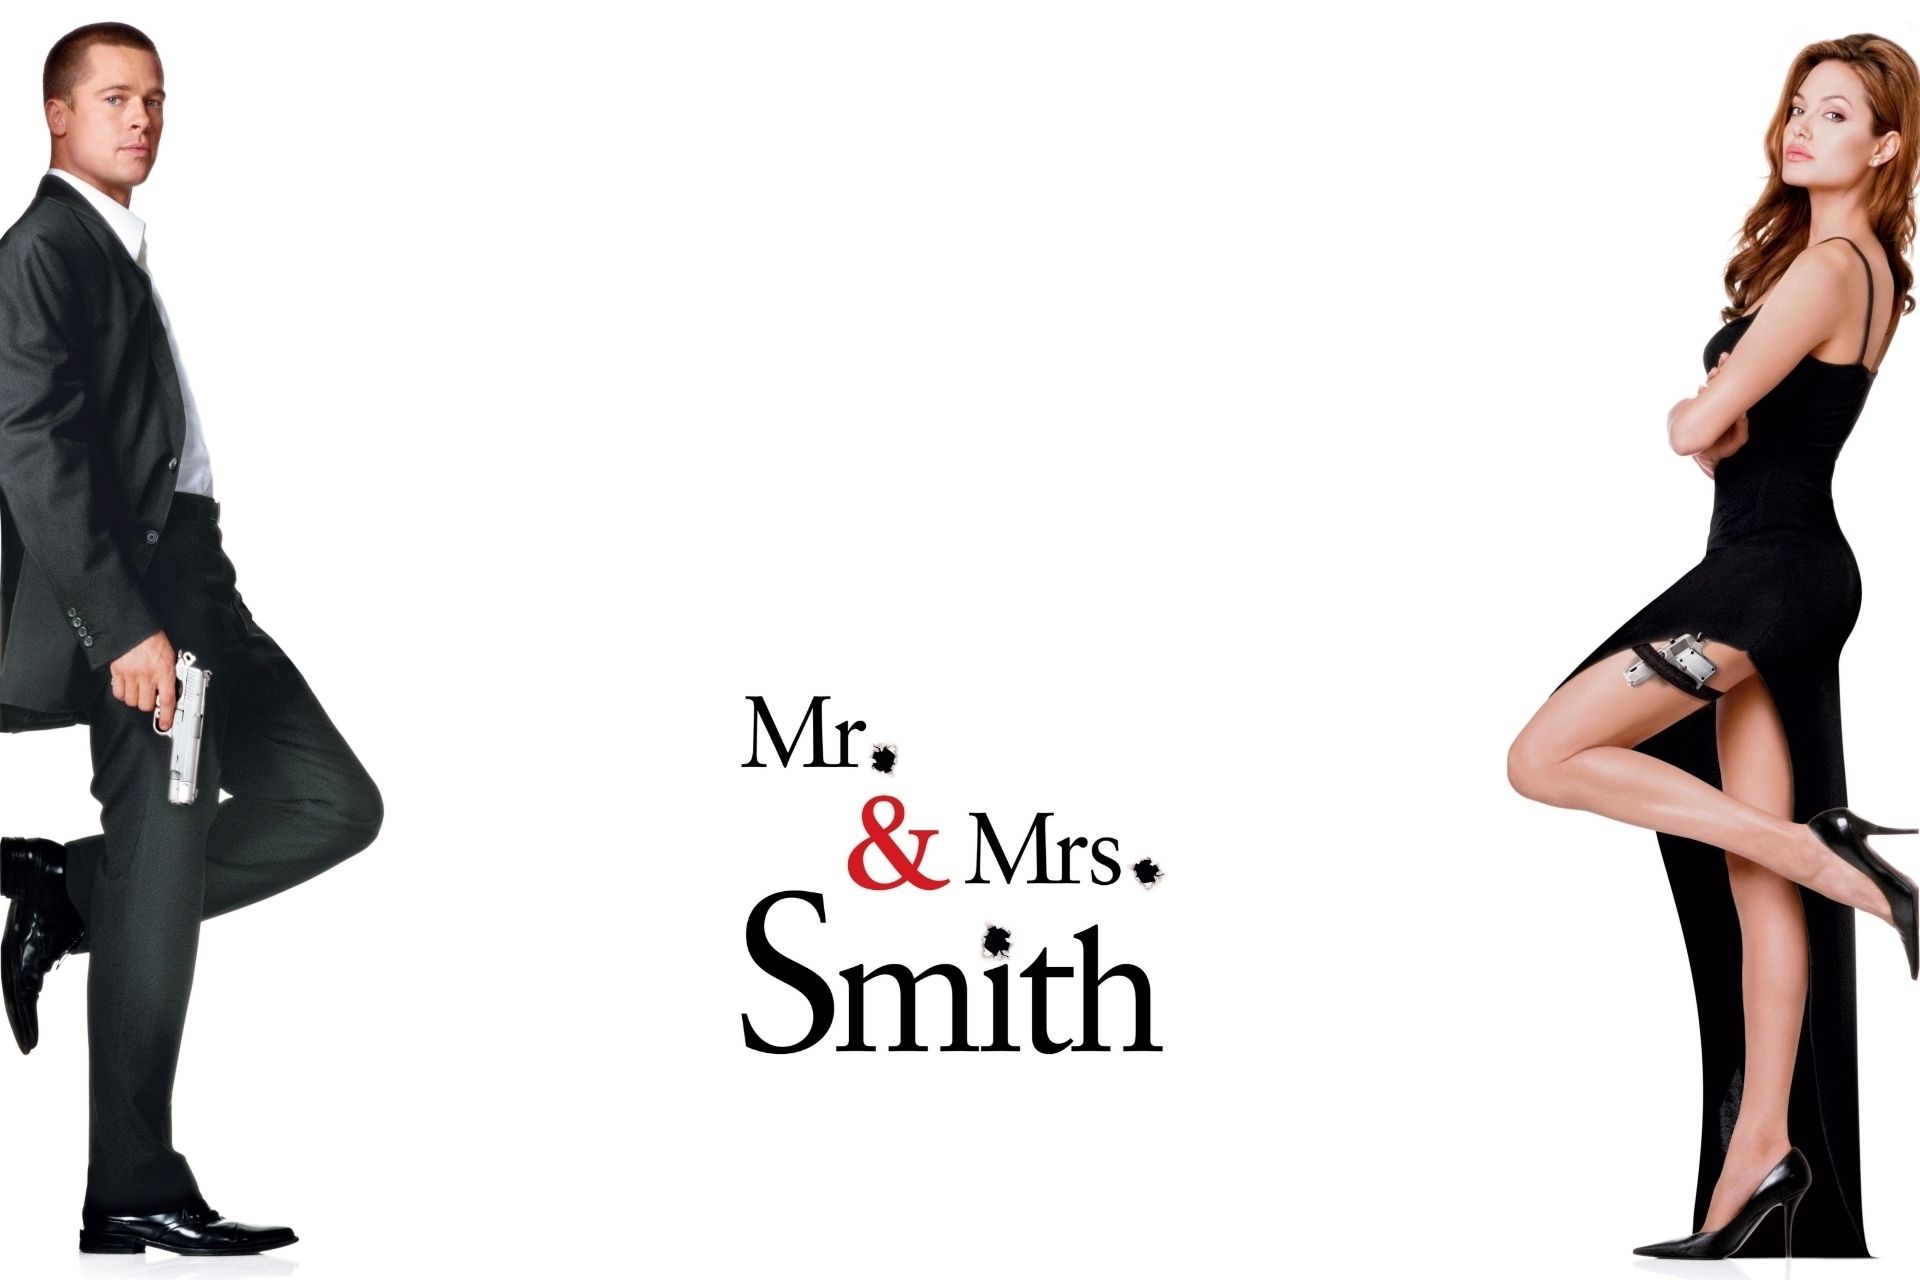 mr and mrs smith, Romantic, Comedy, Action, Mrs, Smith, Angelina, Jolie, Brad, Pitt, Poster Wallpaper